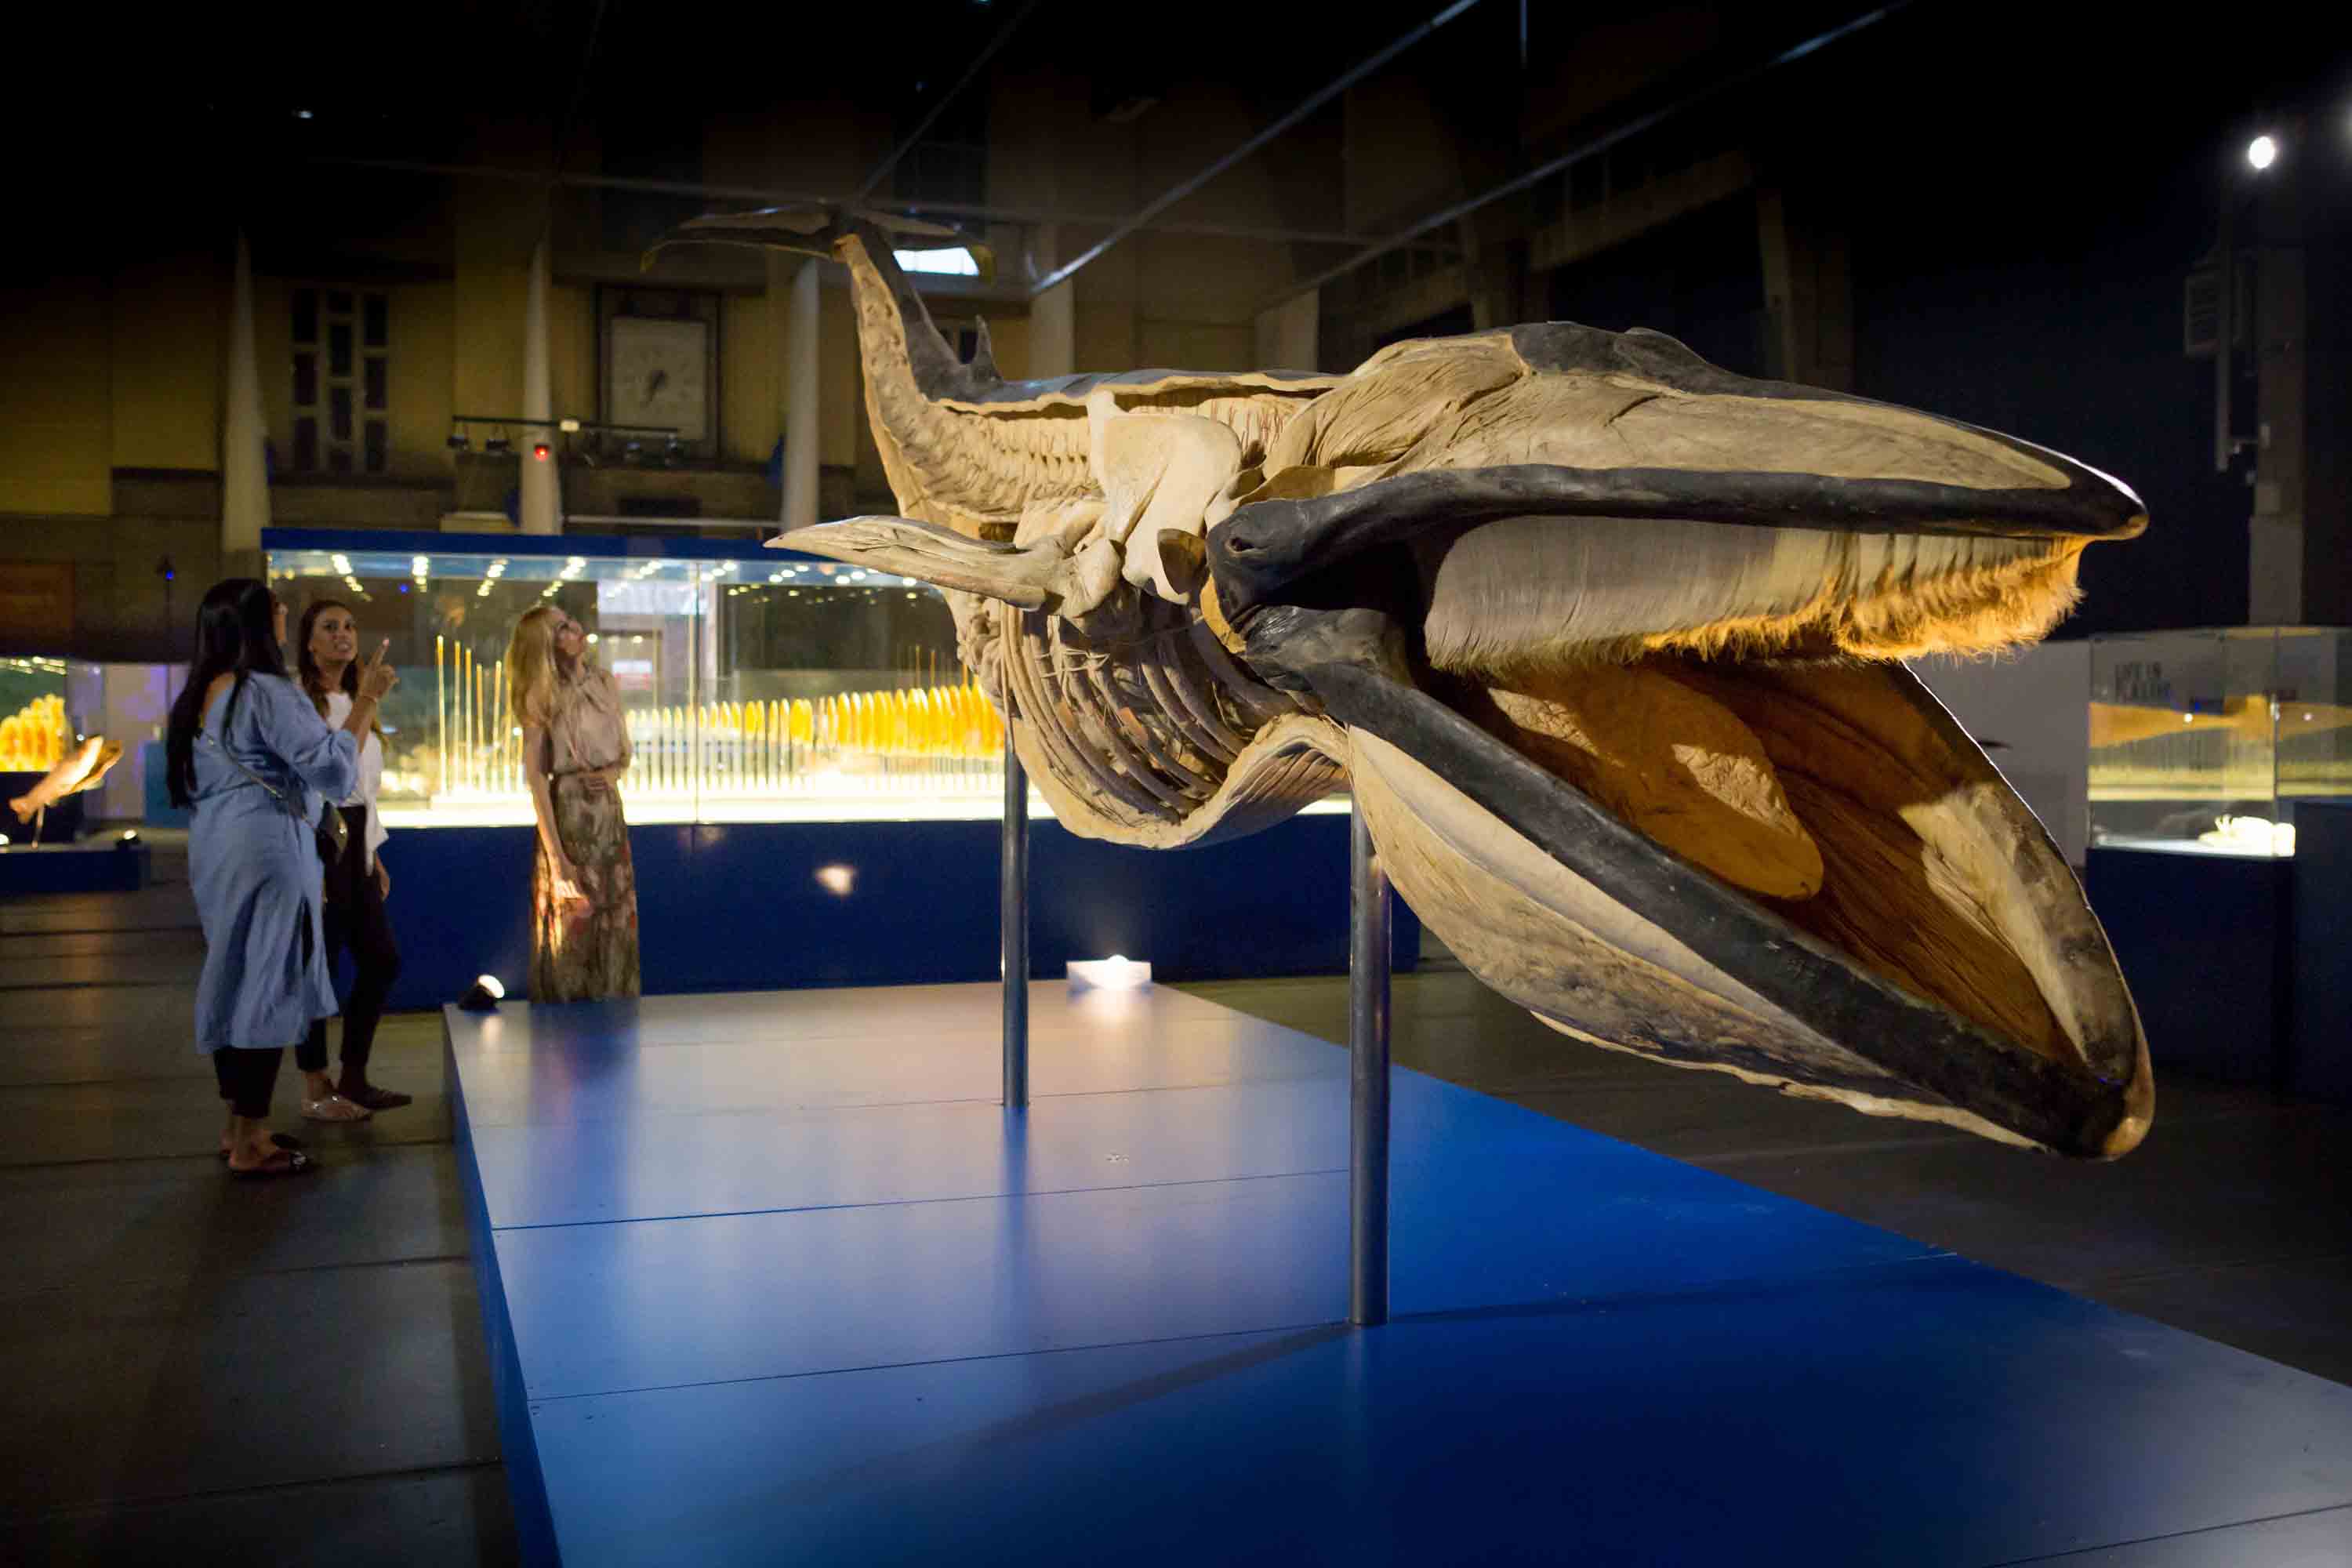 This Haihai Minke whale is one of the exhibits capturing the imagination